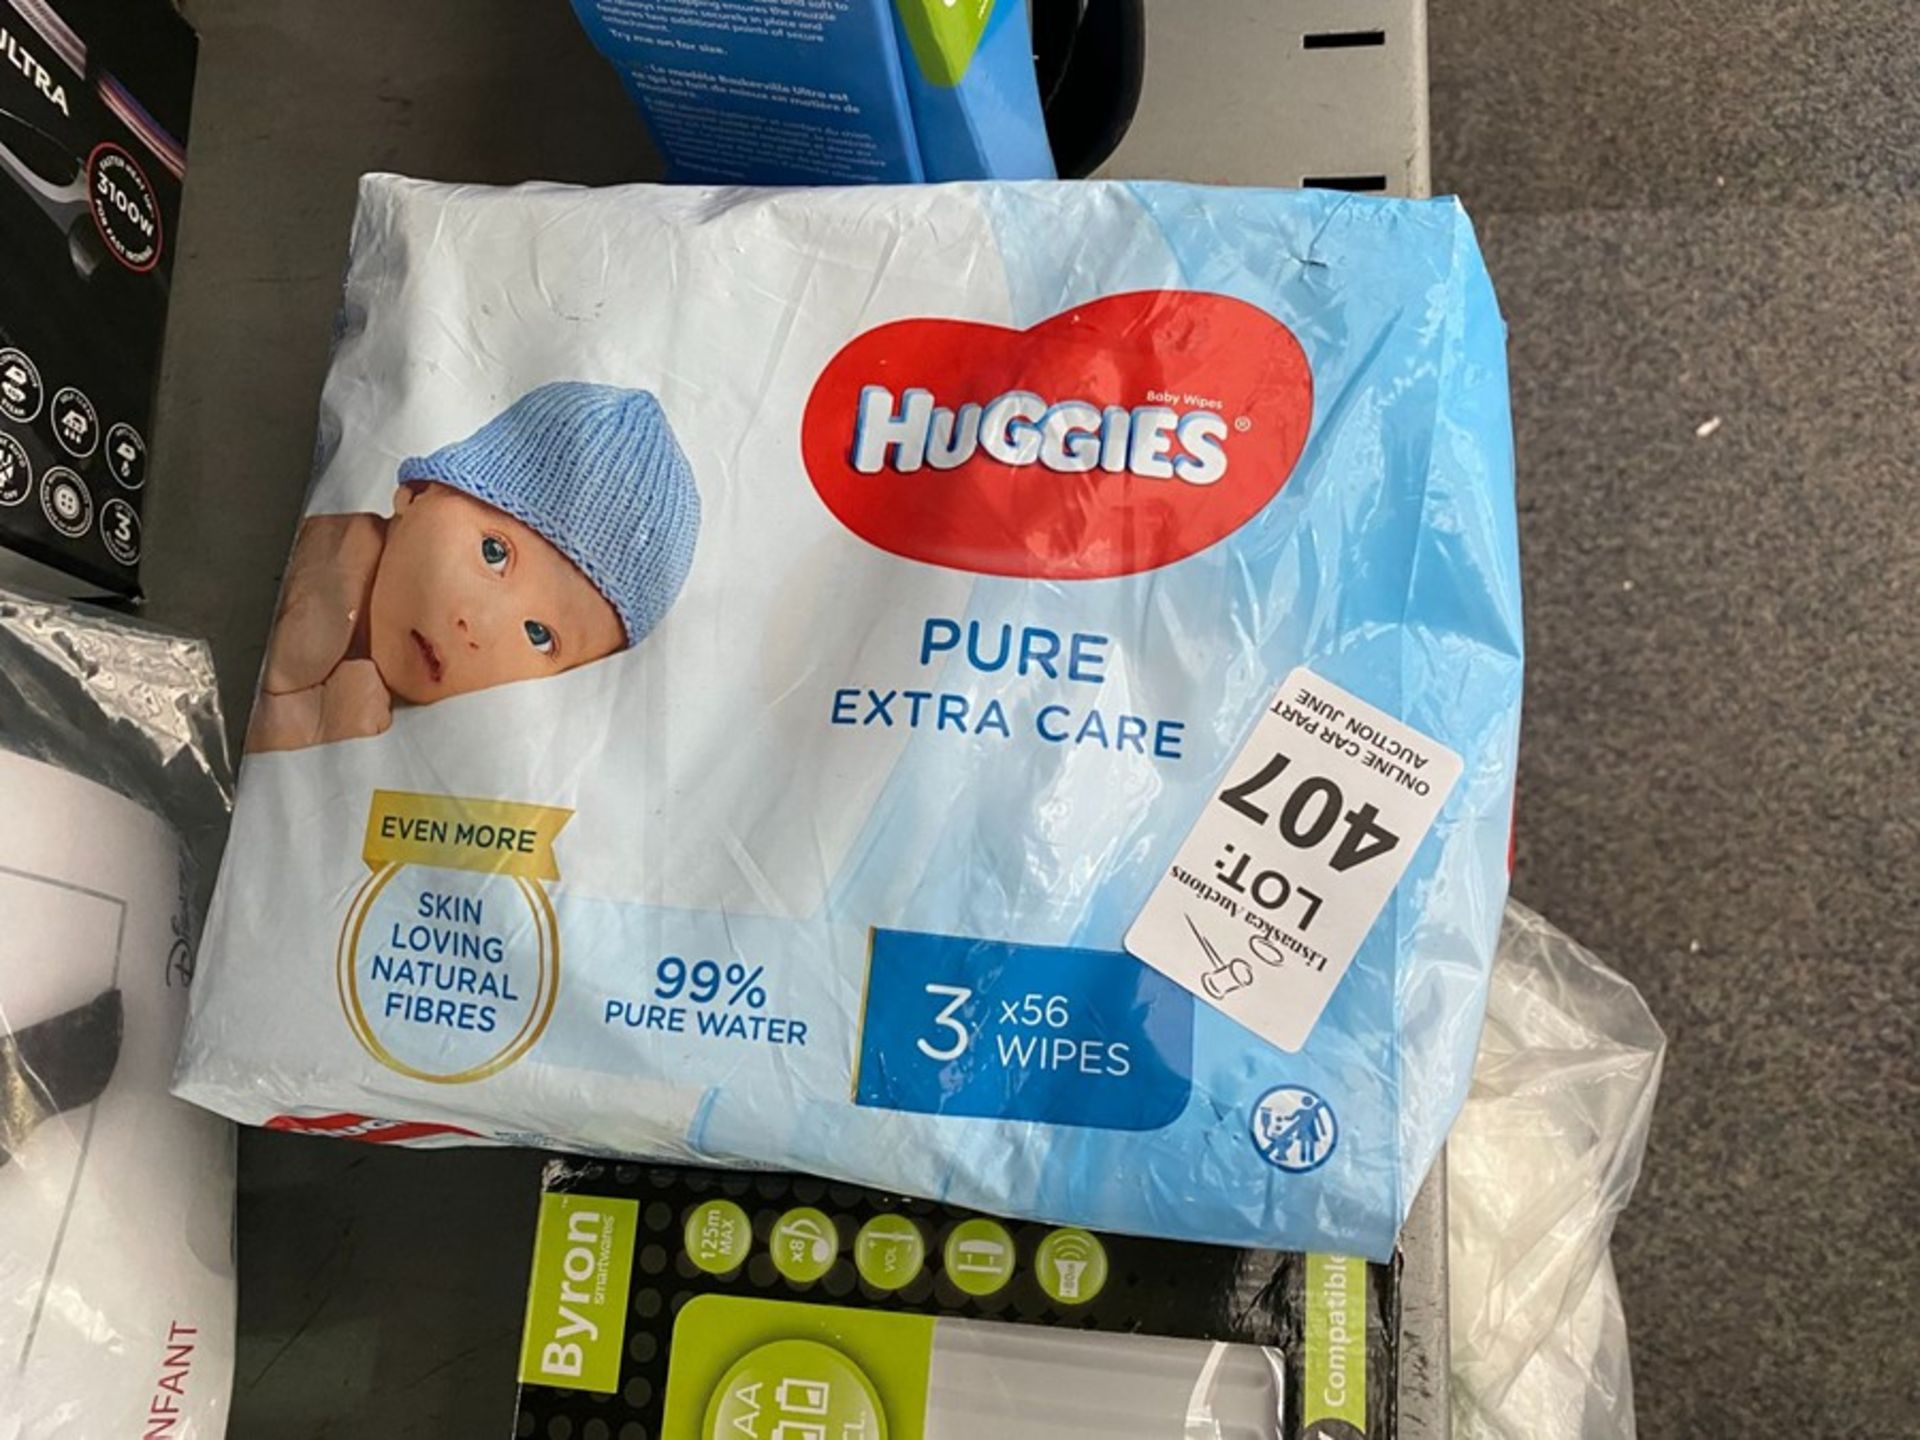 3X PACKS HUGGIES PURE EXTRA CARE WIPES